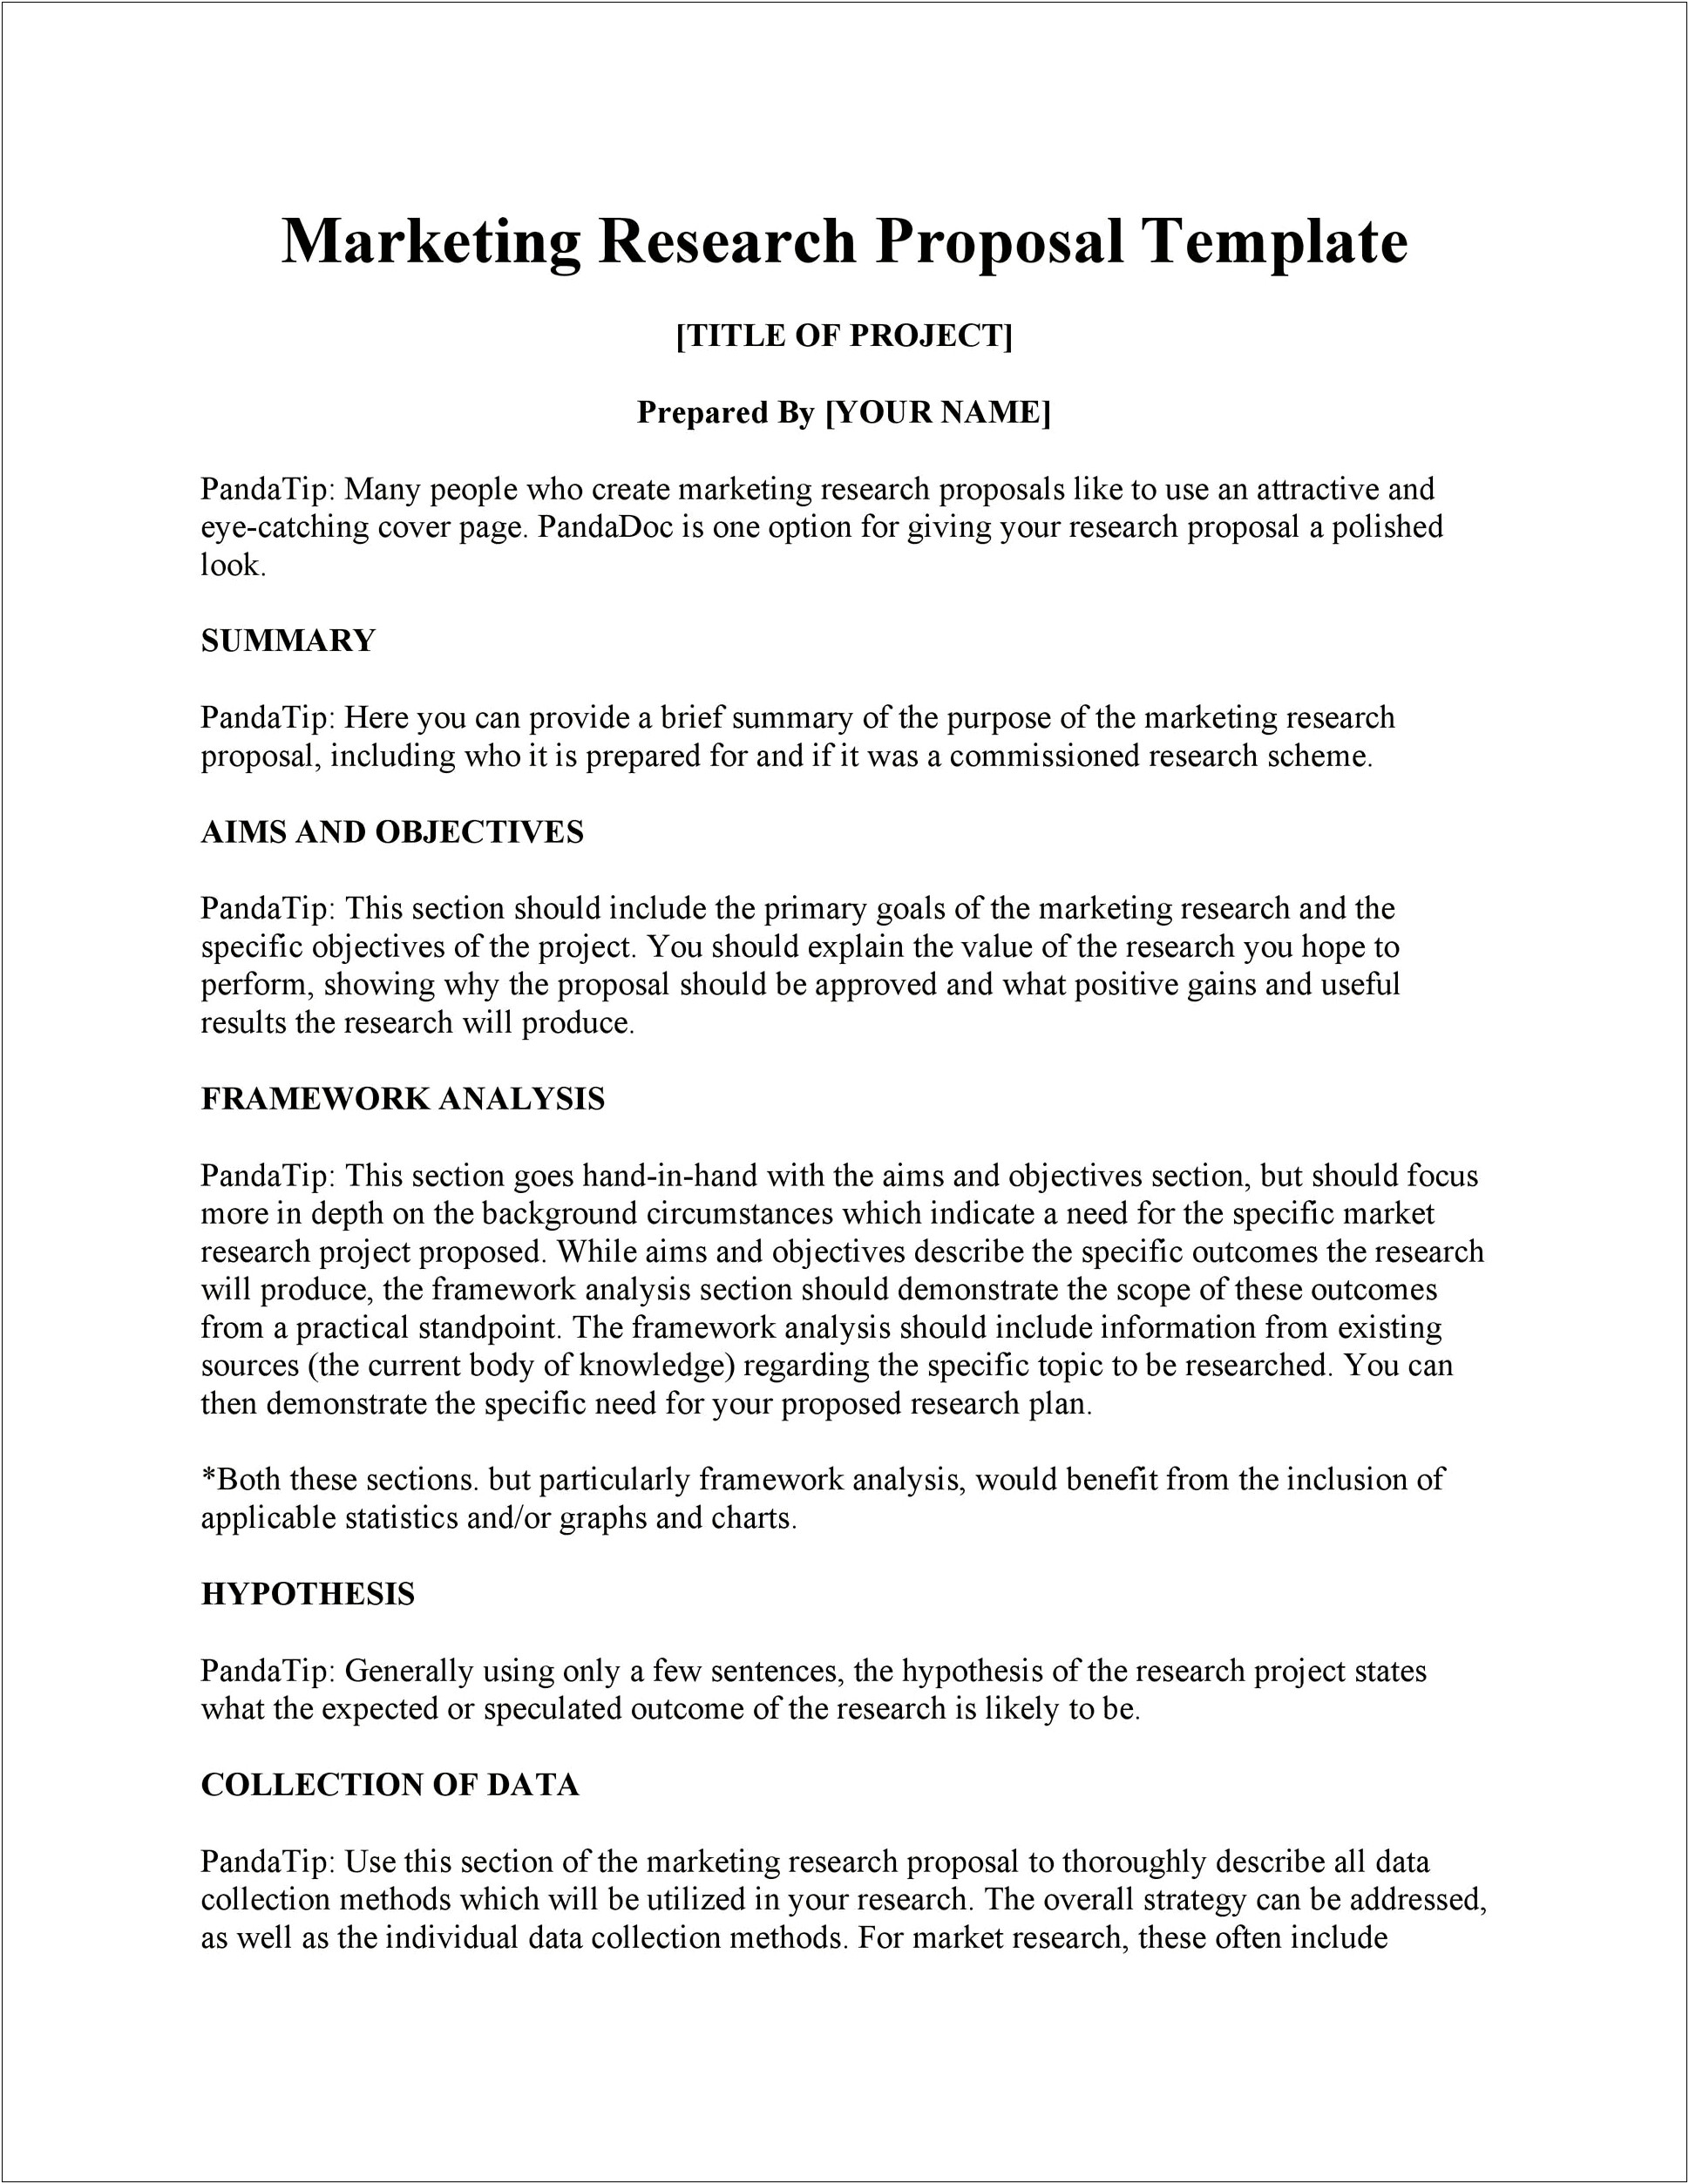 Marketing Research Proposal Template Word Document